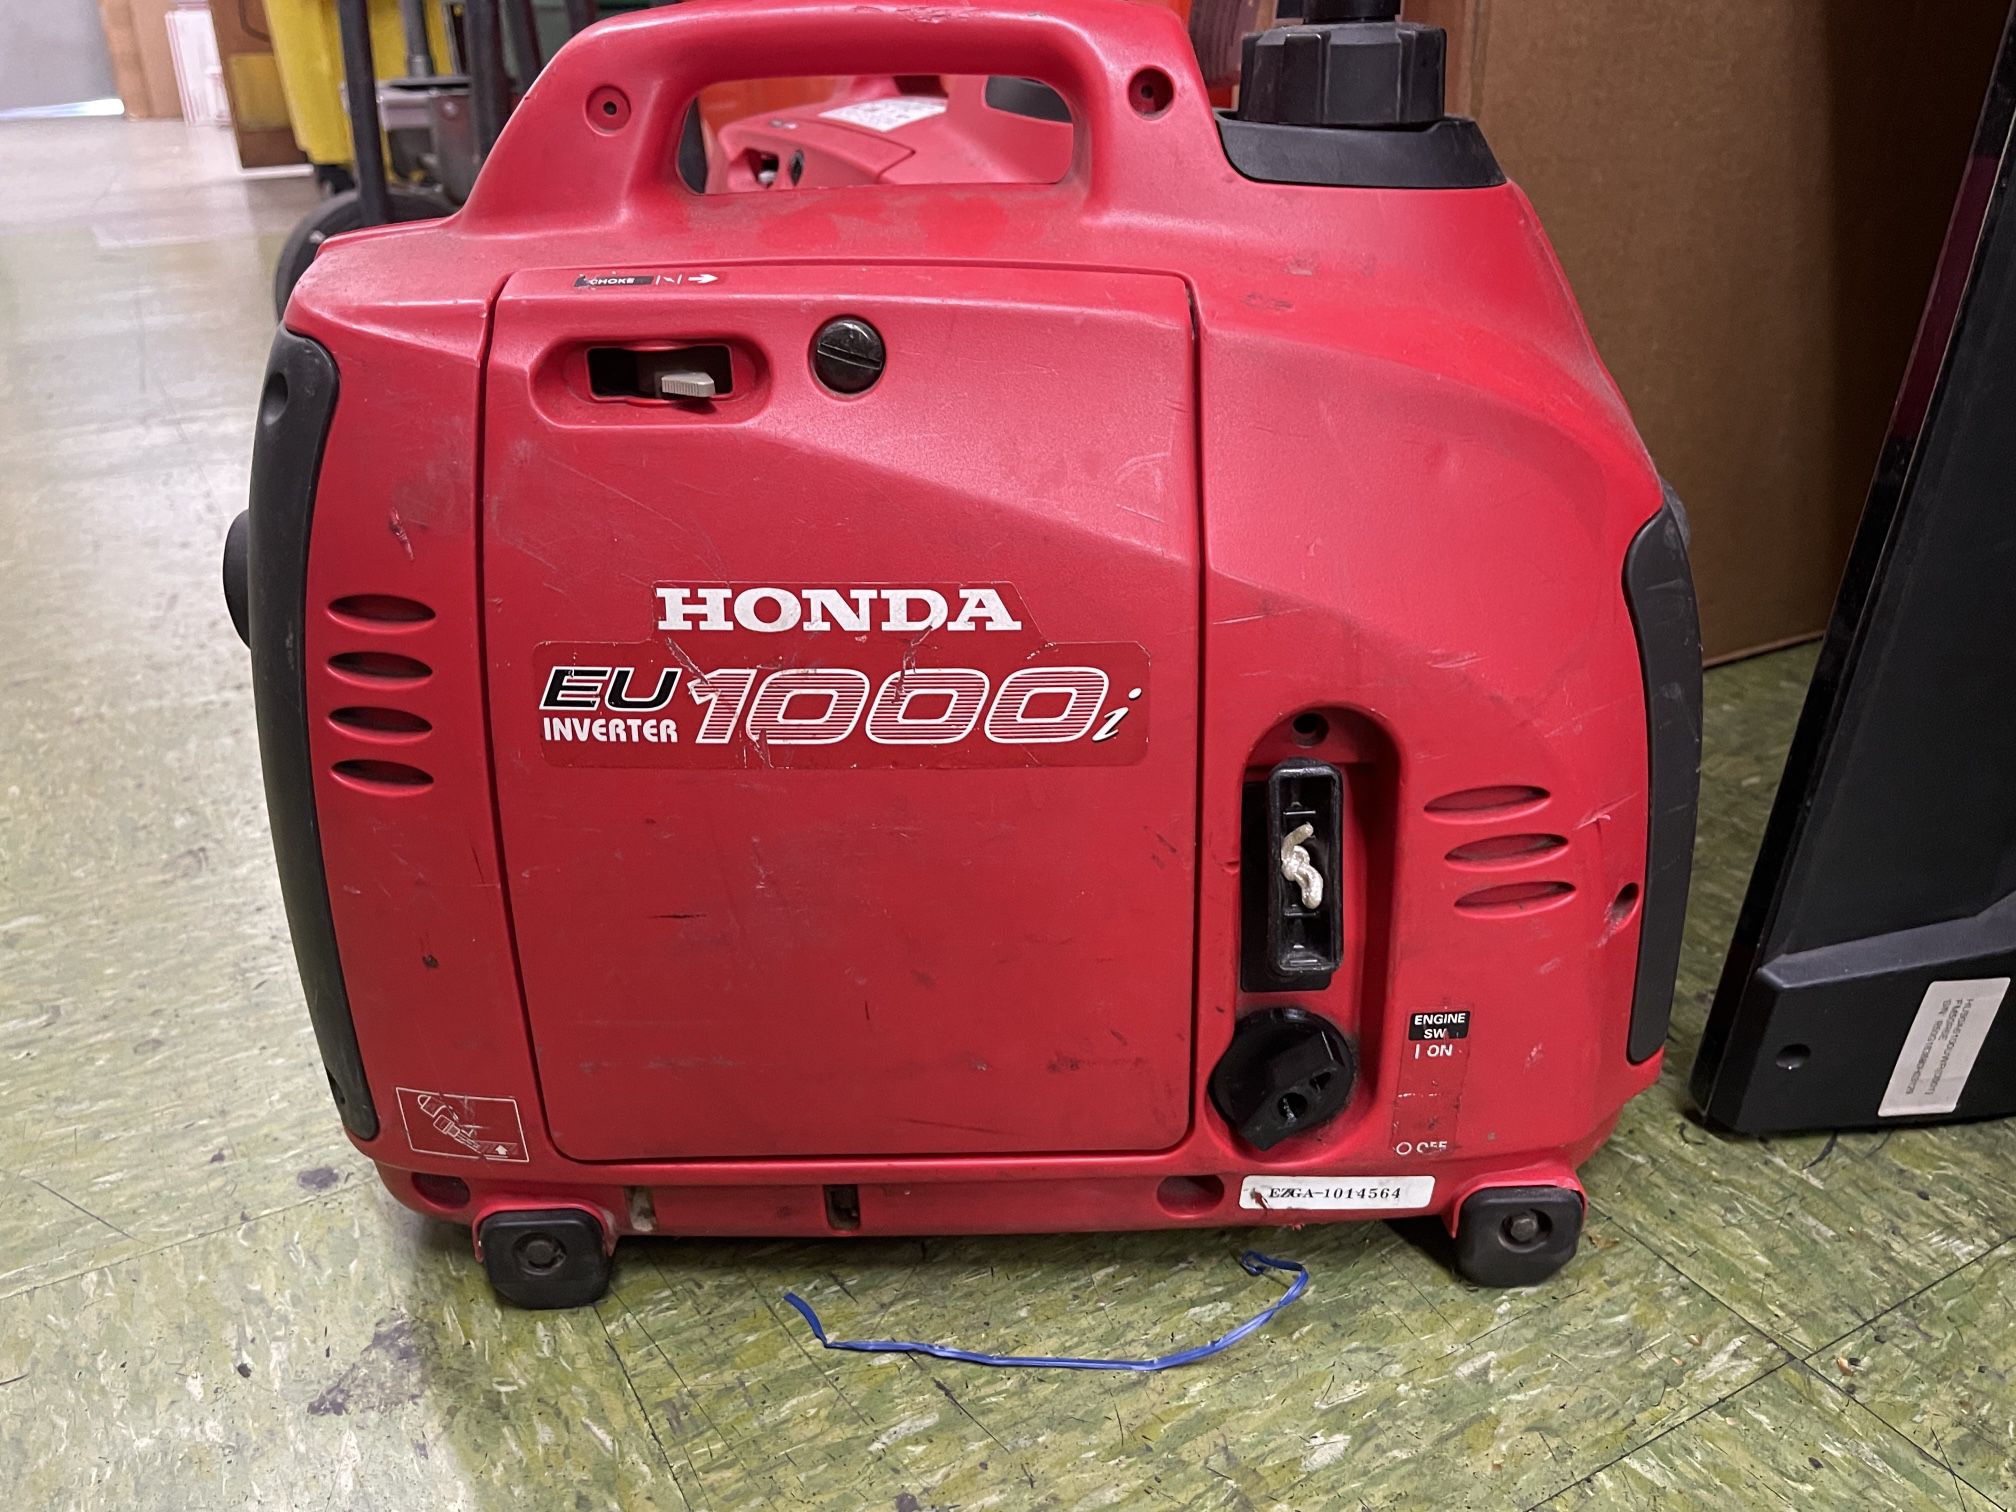 Honda EU1000i Inverter Generator, Super Quiet, Eco-Throttle, 1000 Watts Amps 120v for appliances construction camping Portable for Sale in Long Beach, CA - OfferUp